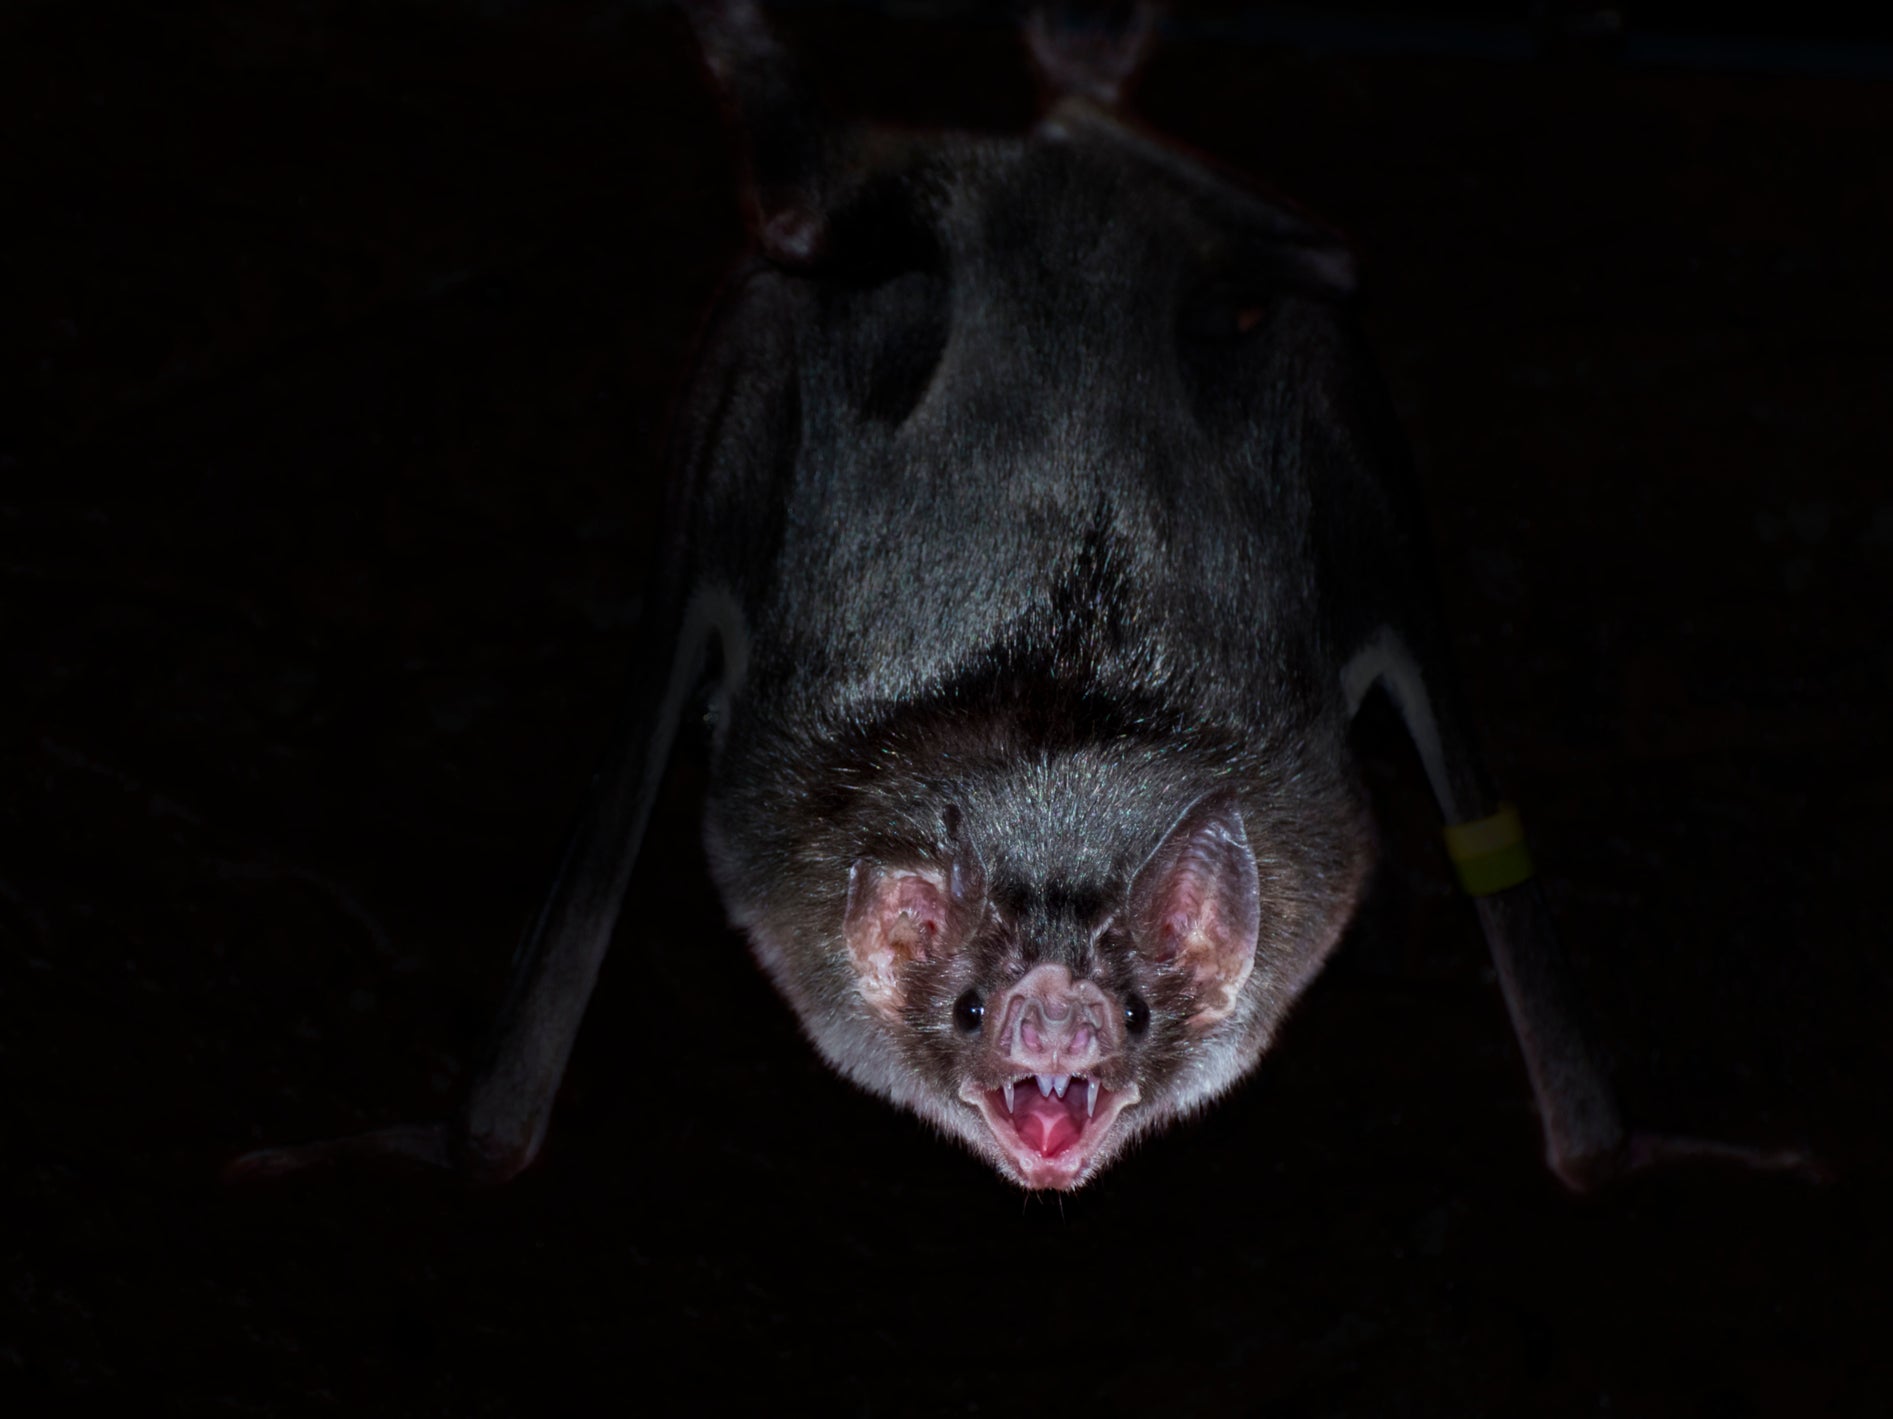 Vampire bats have fewer social interactions when ill, new research shows